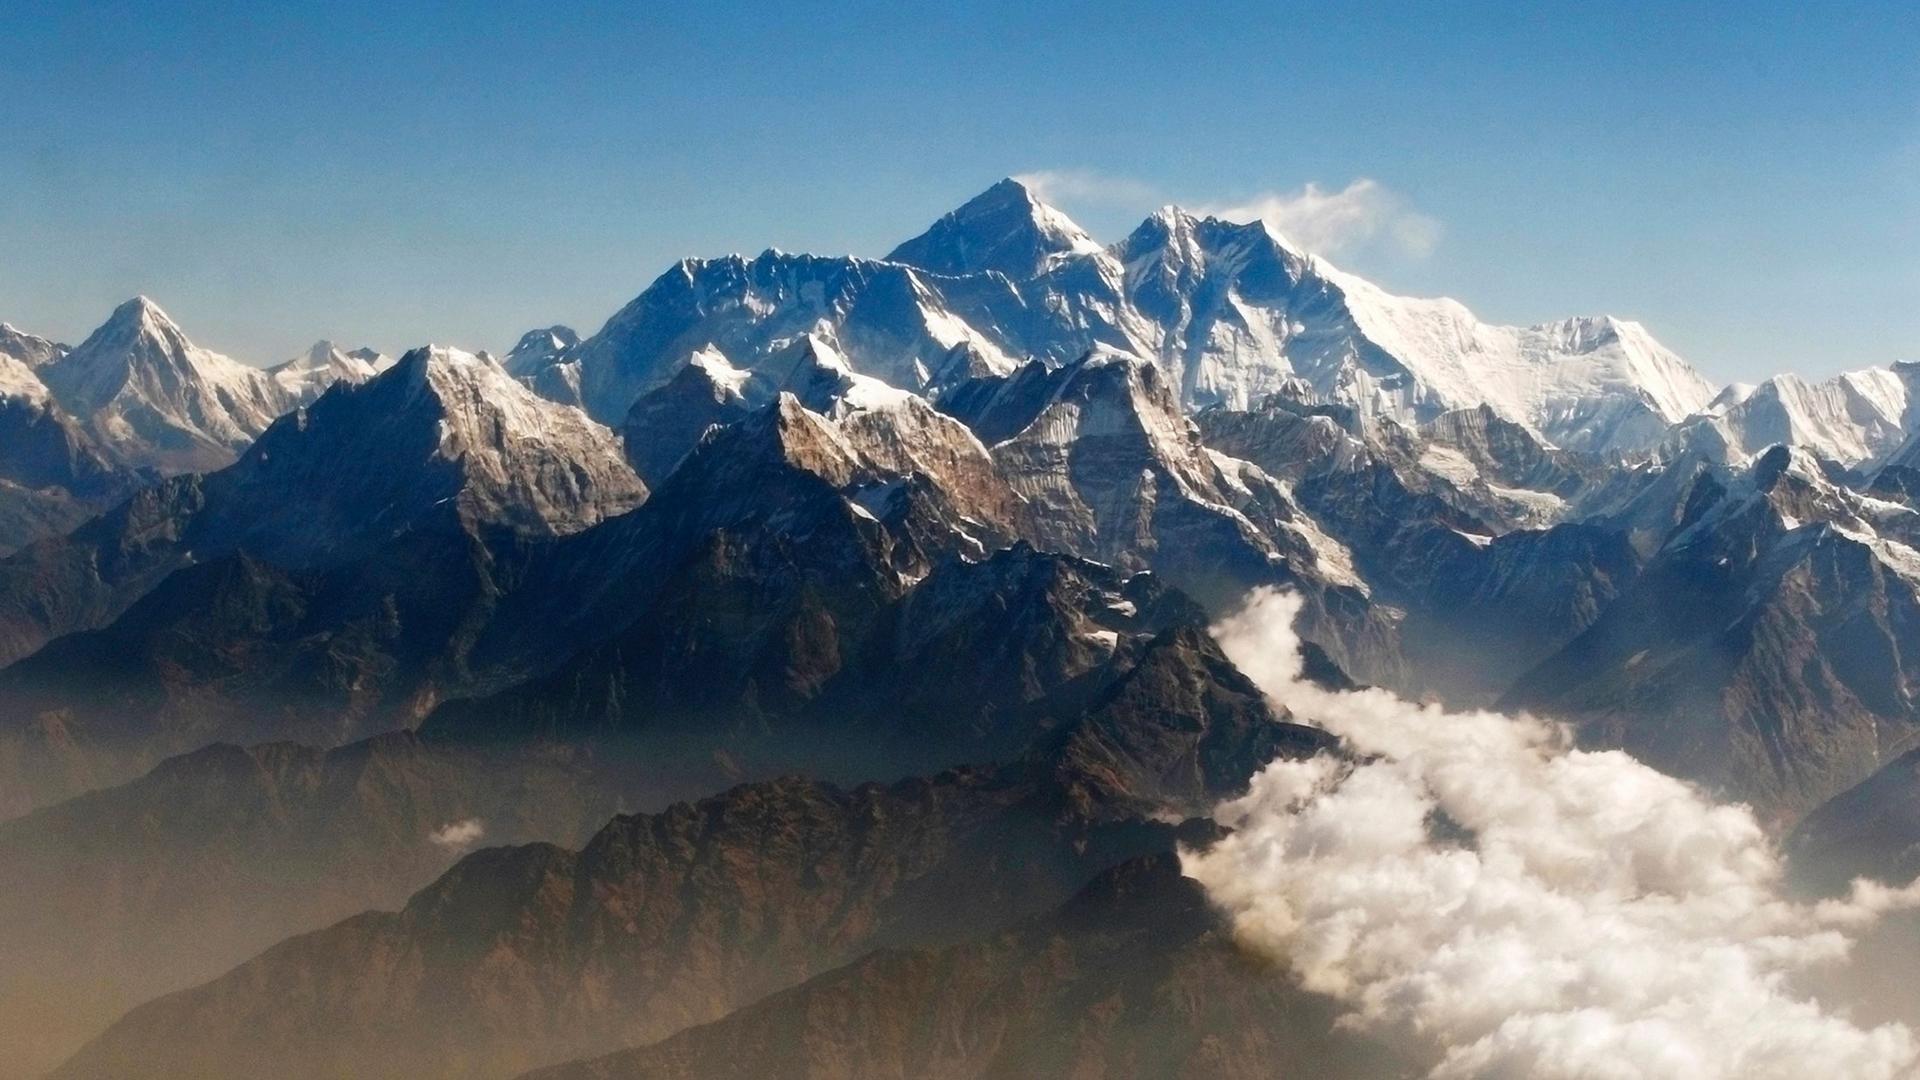 Mount Everest and the Himalayan mountain range covered in snow, seen from above. 